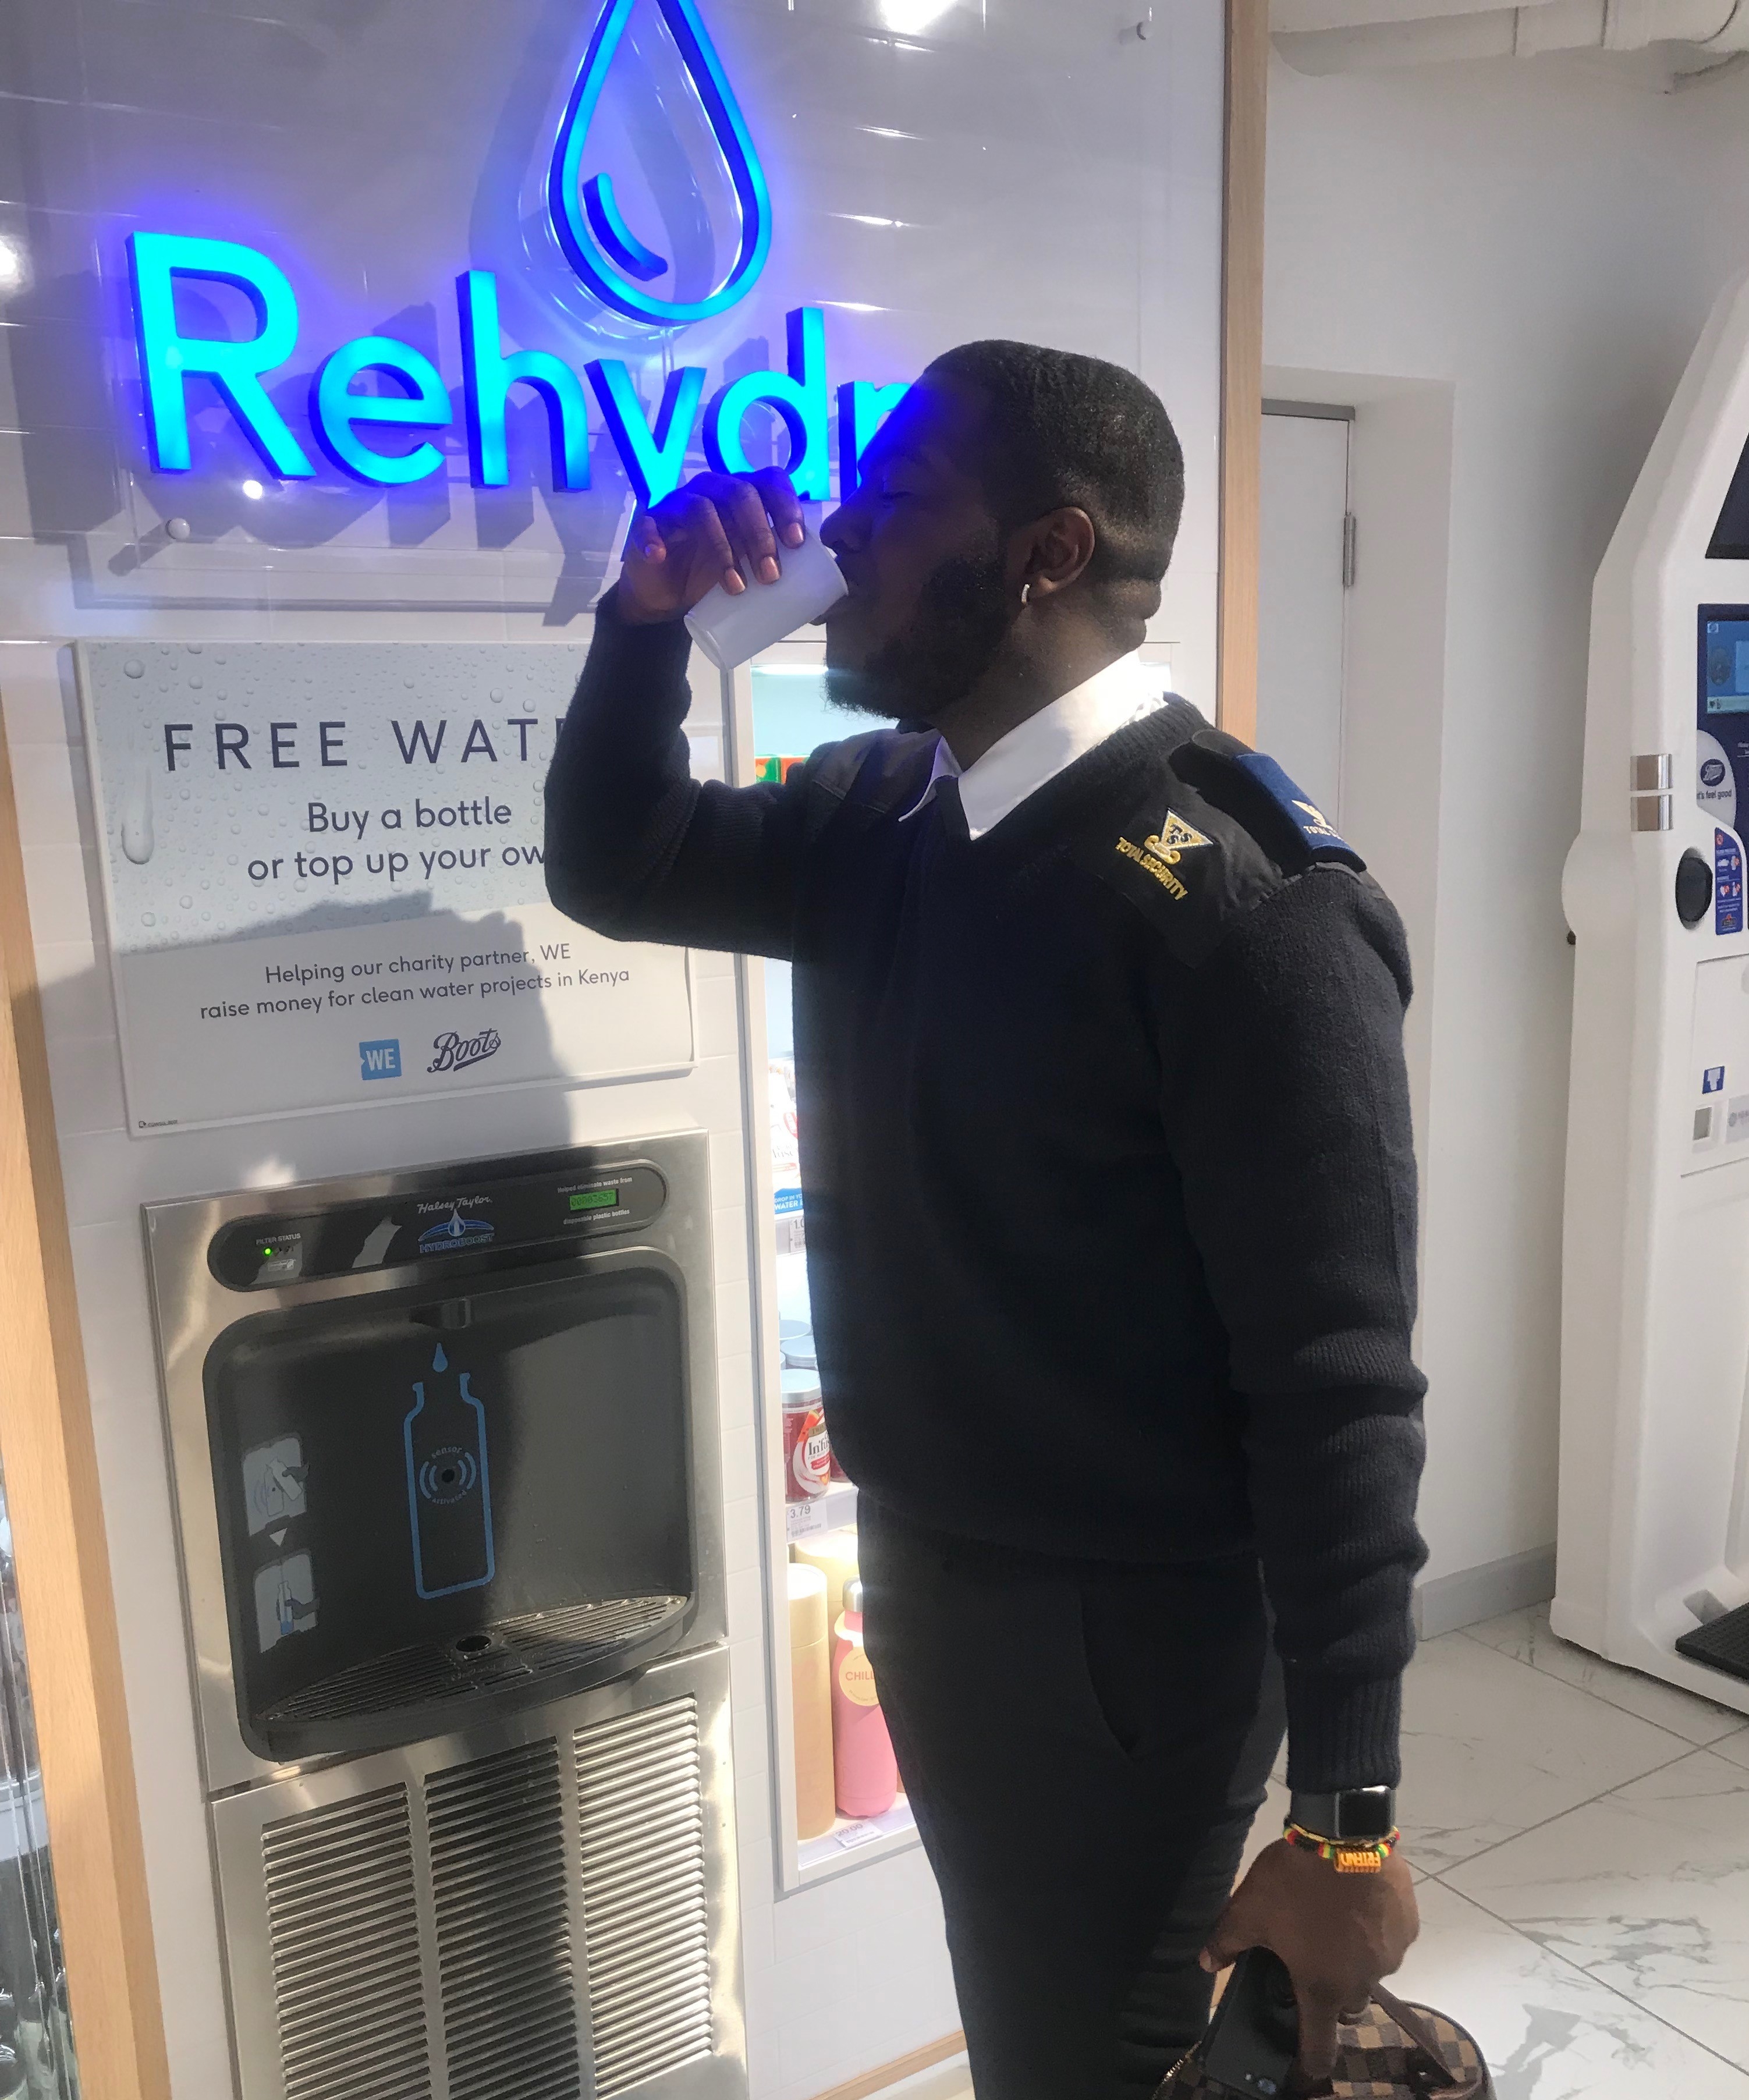 Security guard drinking water from the new refill station.